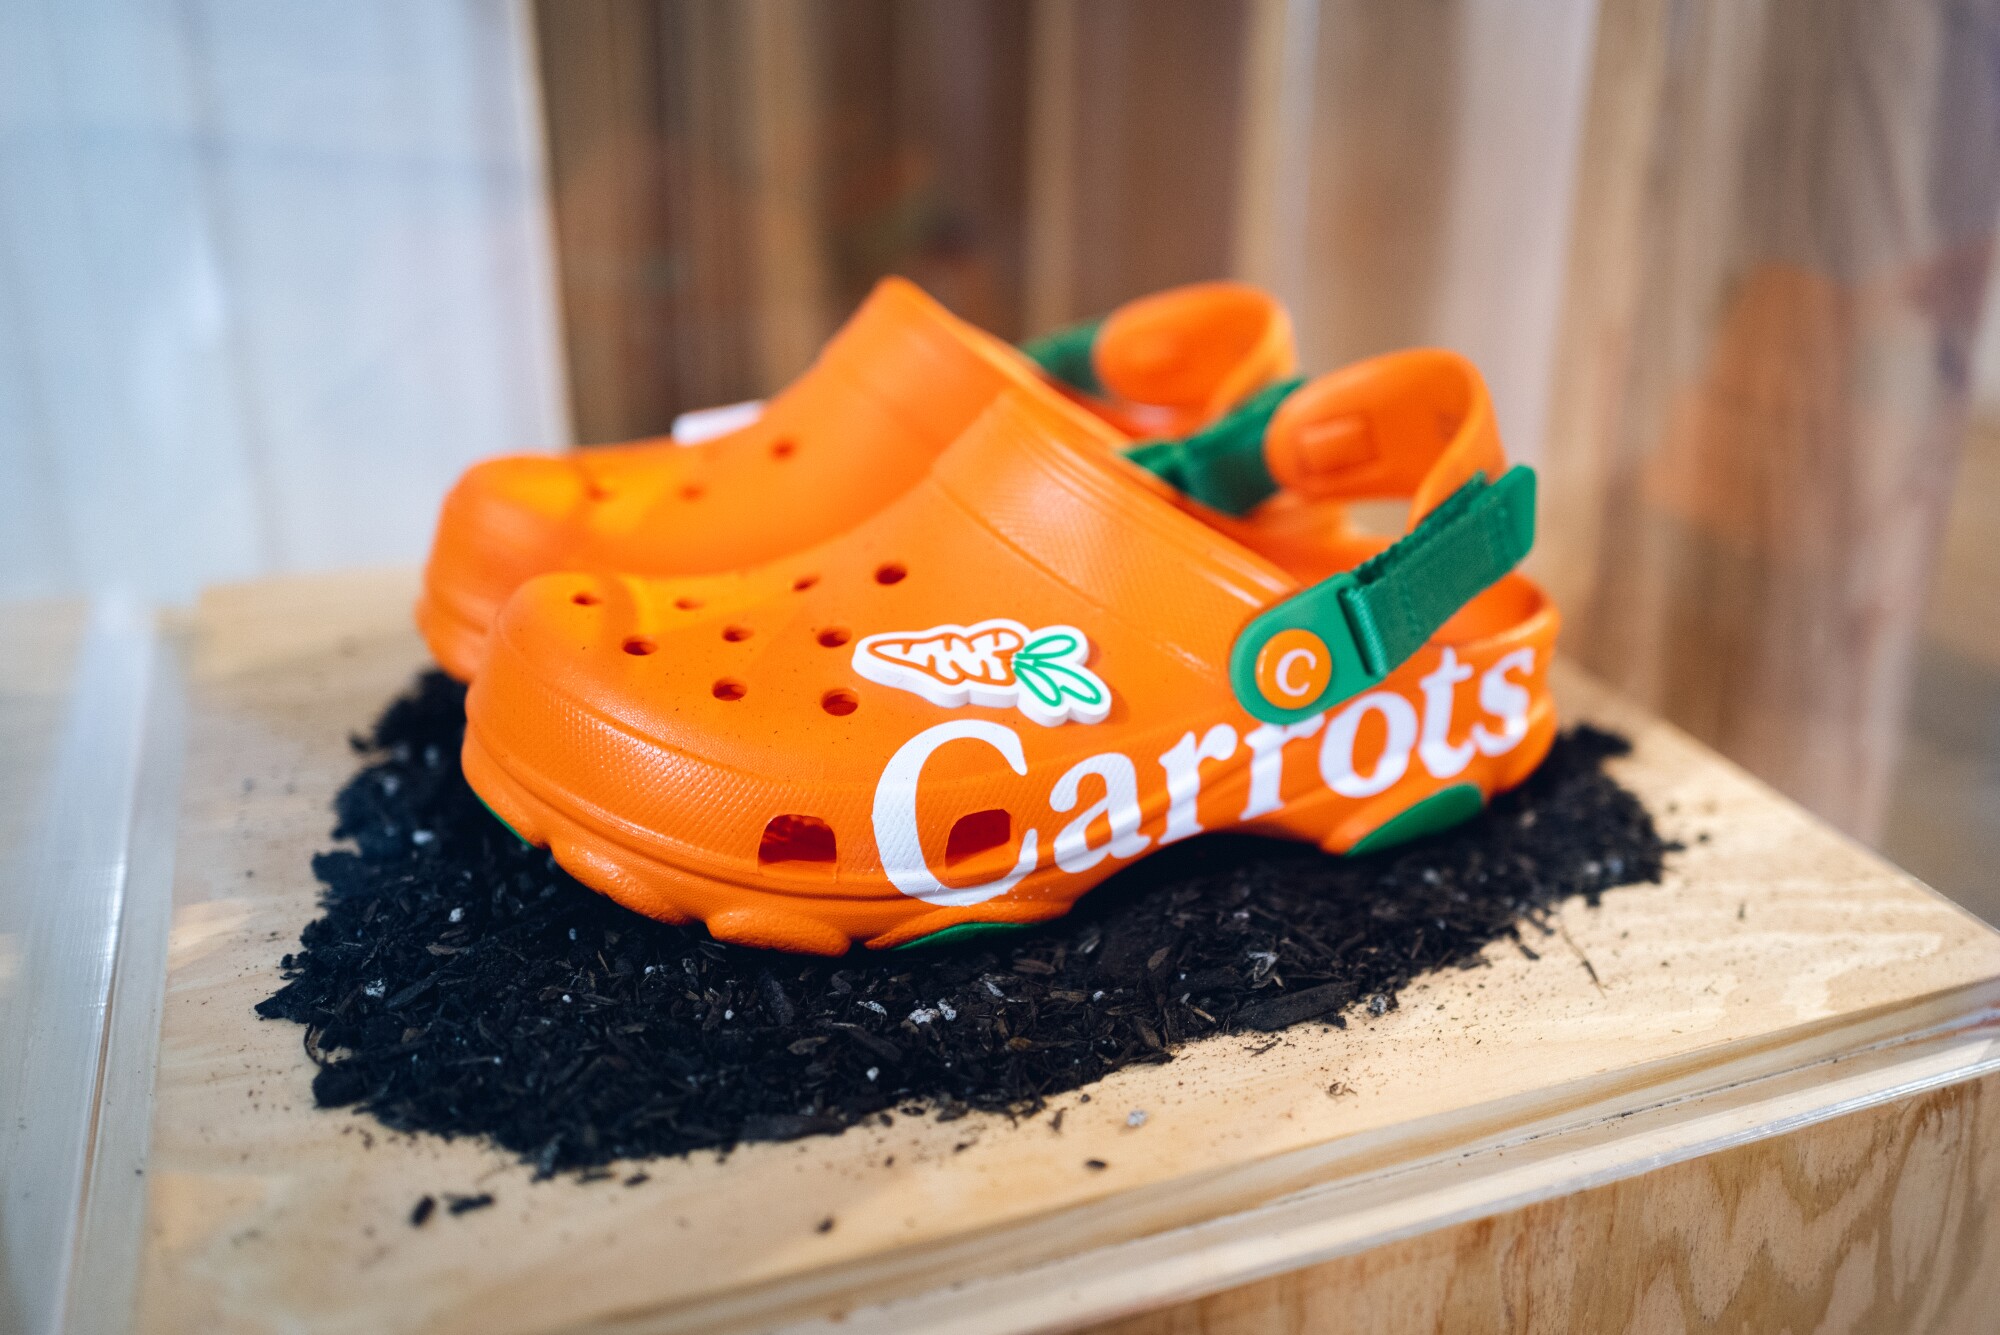 Carrots is known for his collaborations, including this one with Crocs.